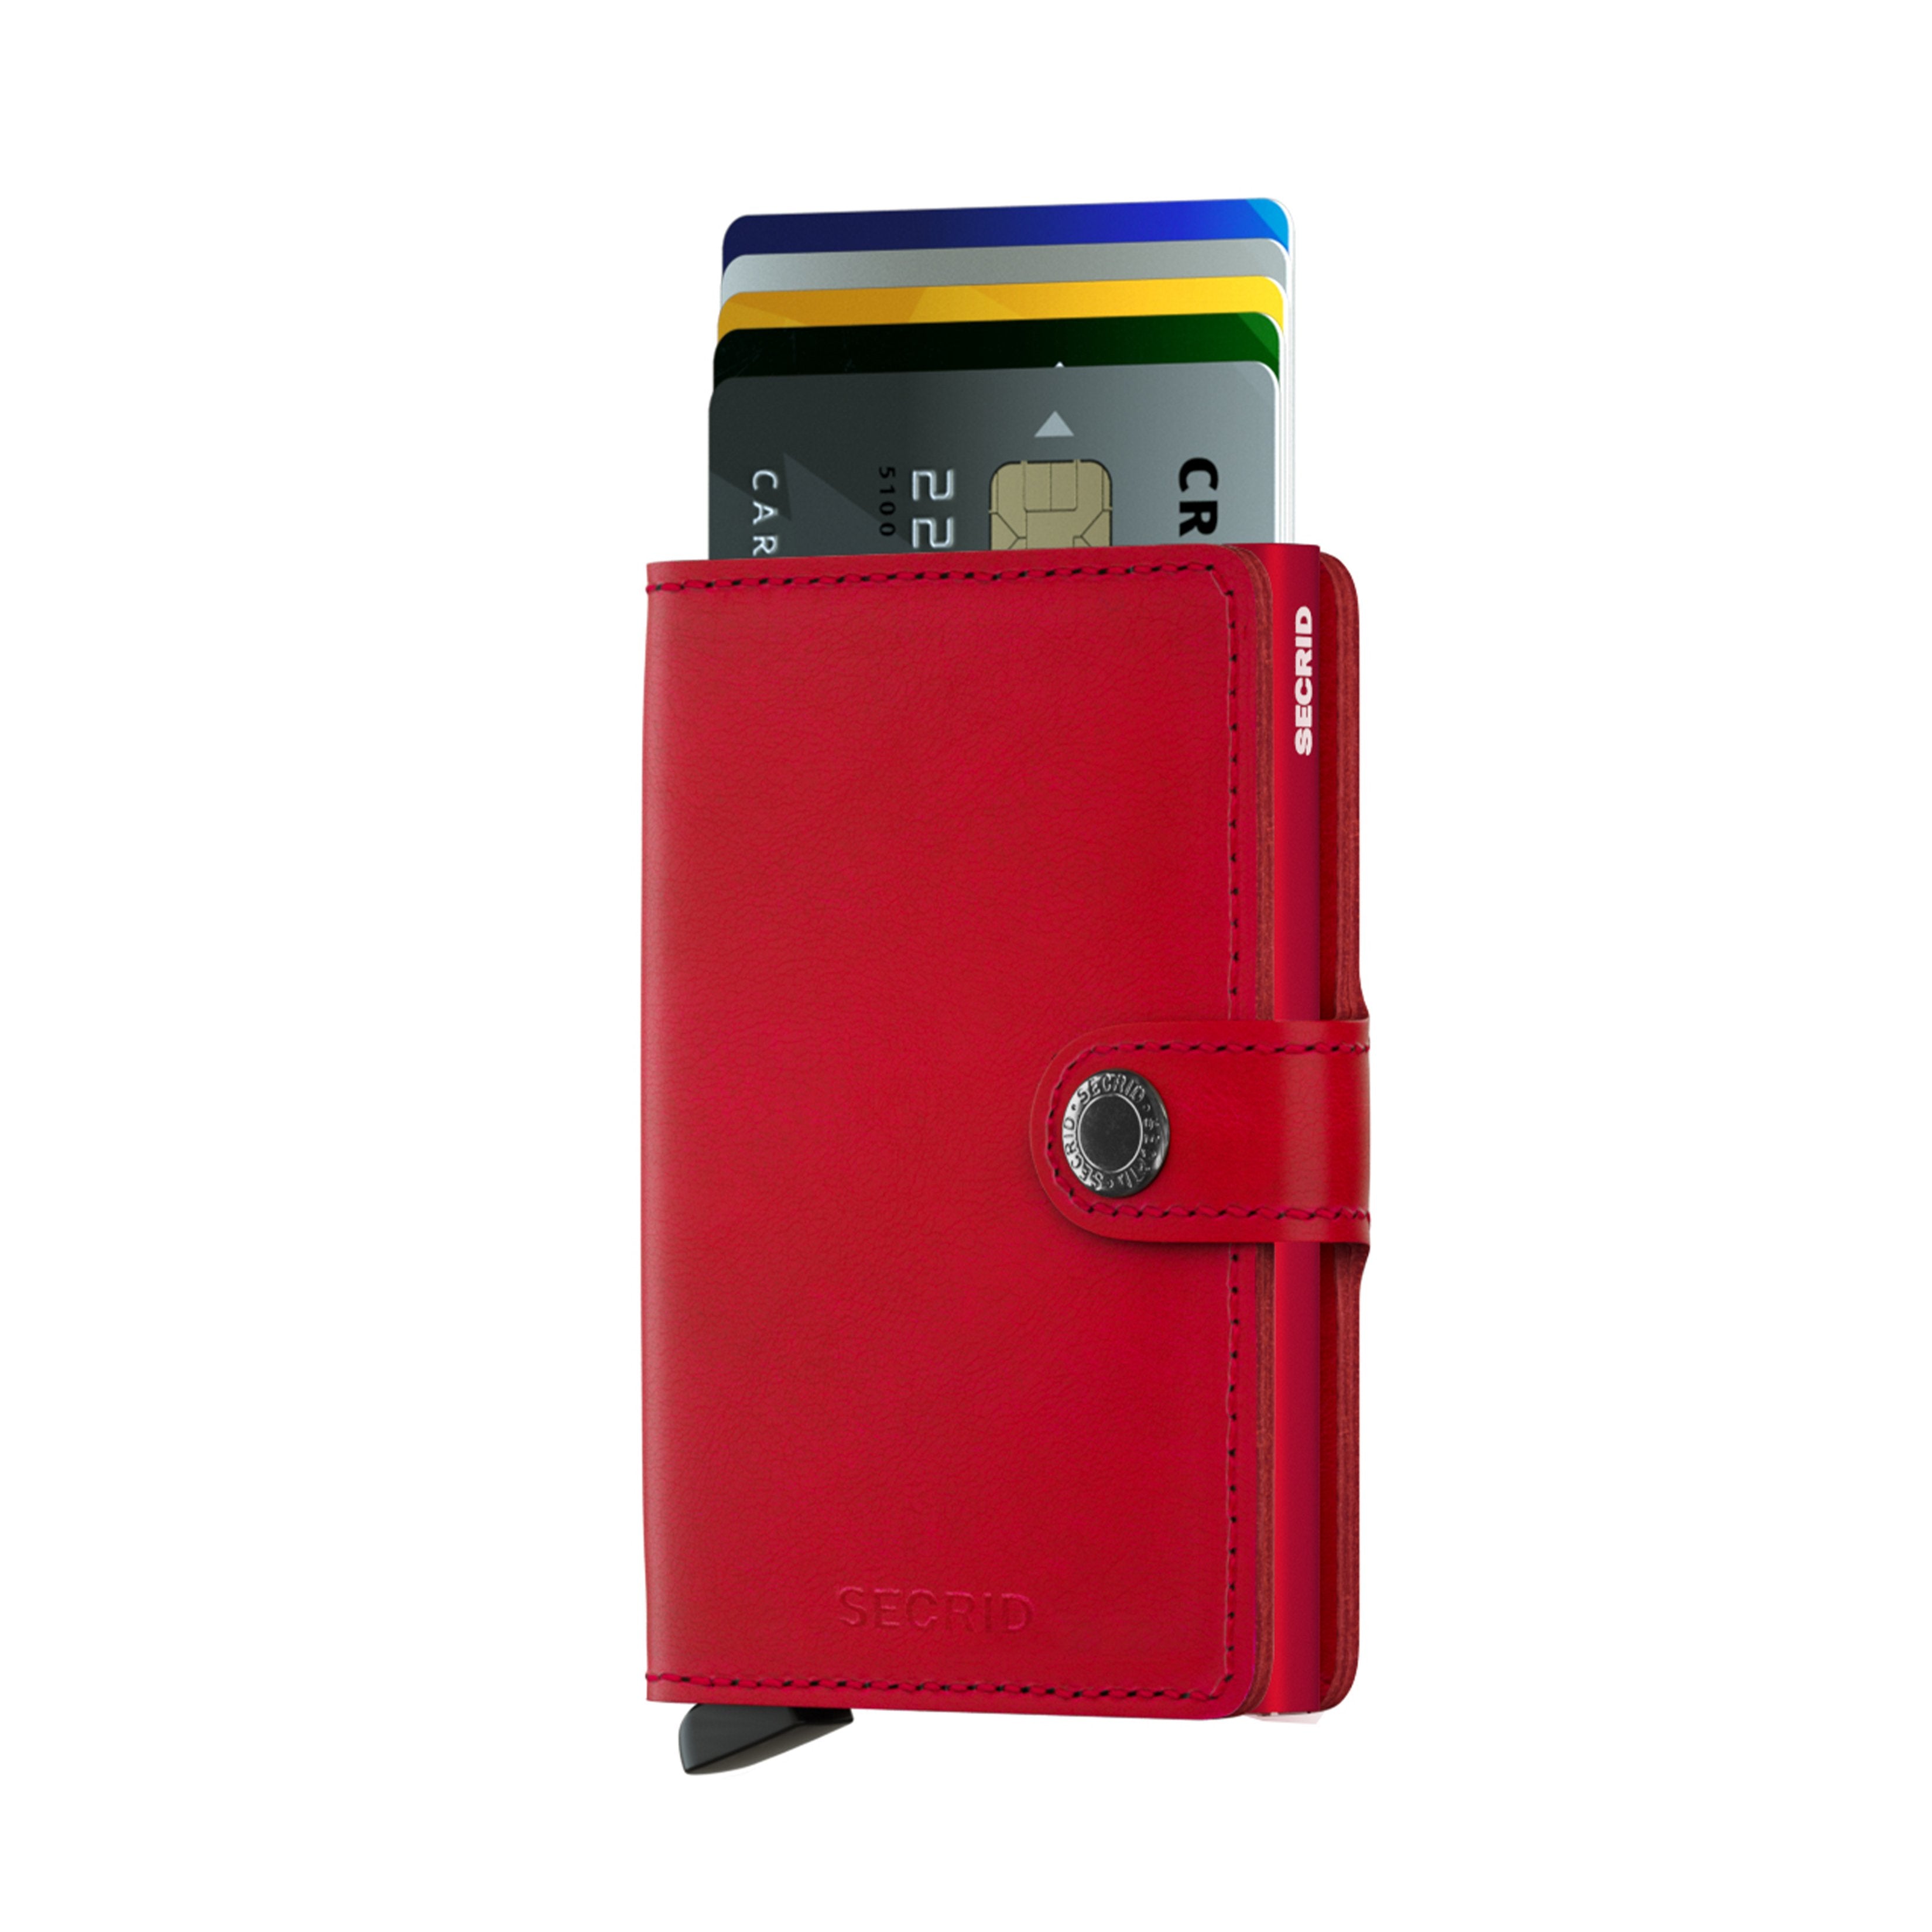 Miniwallet original red with 6 cards